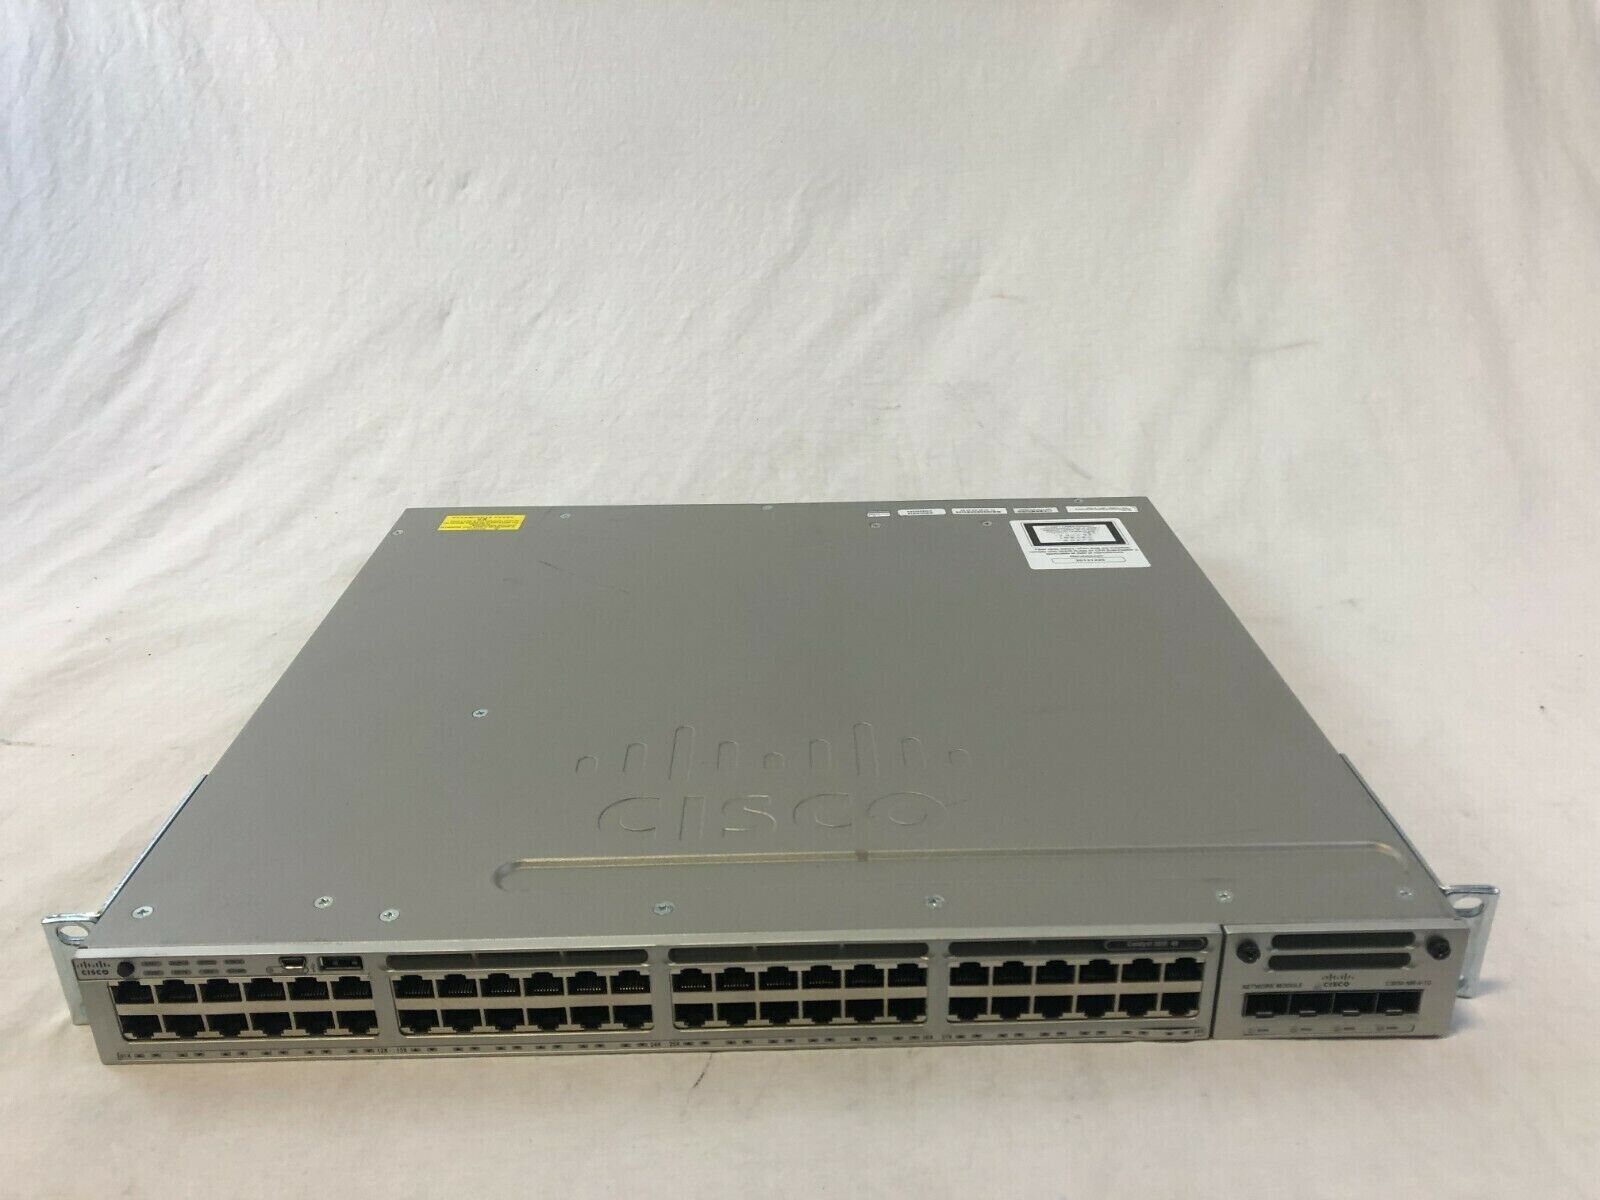 Cisco WS-C3850-48P-E 3850 Series Switch With C3850-NM-4-1G and Single Pwr Sply